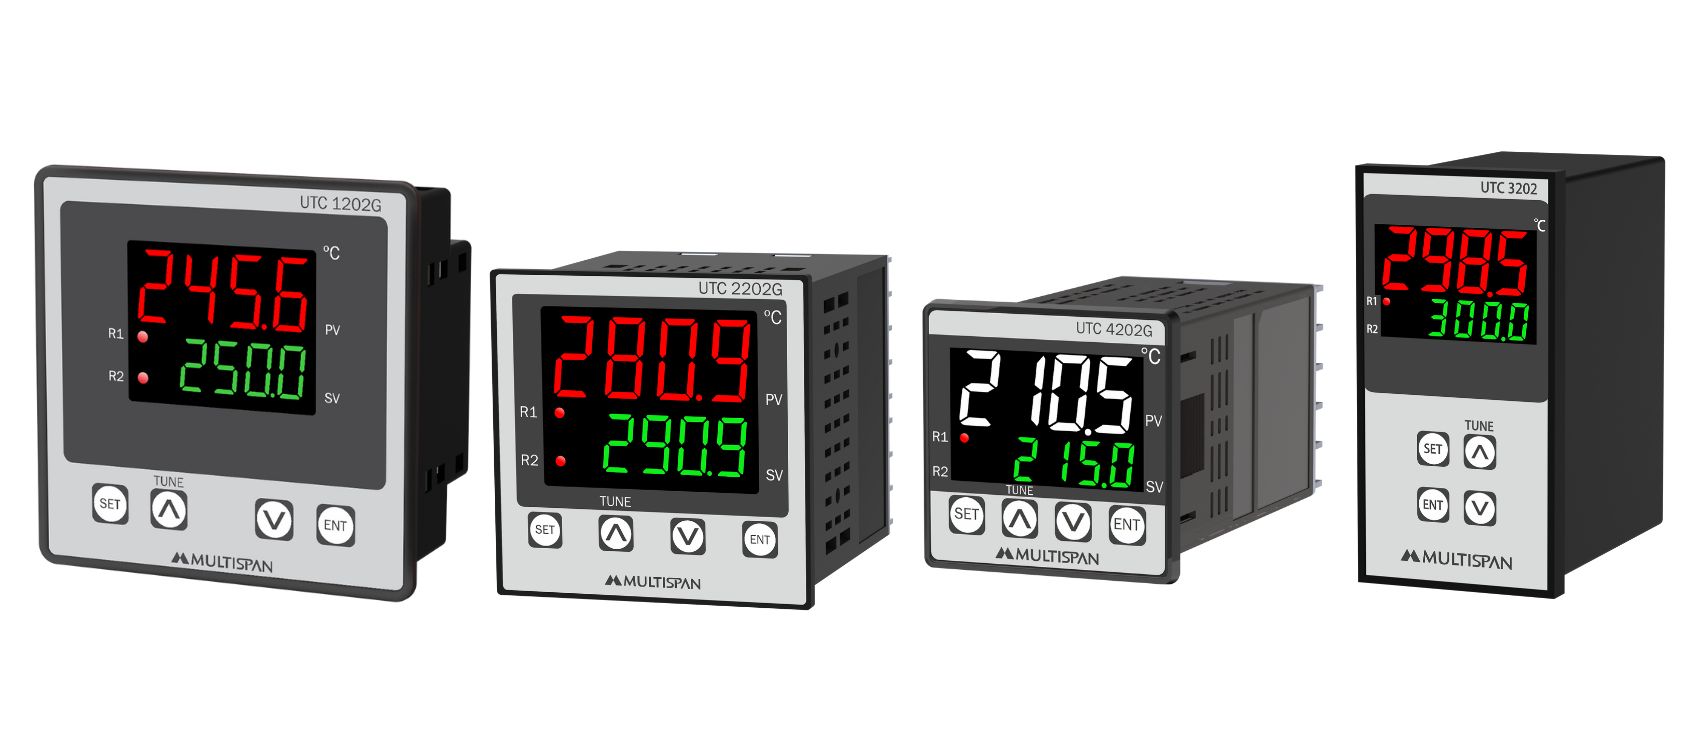 UTC-1202G PID Controller - Dual Output Model - product image